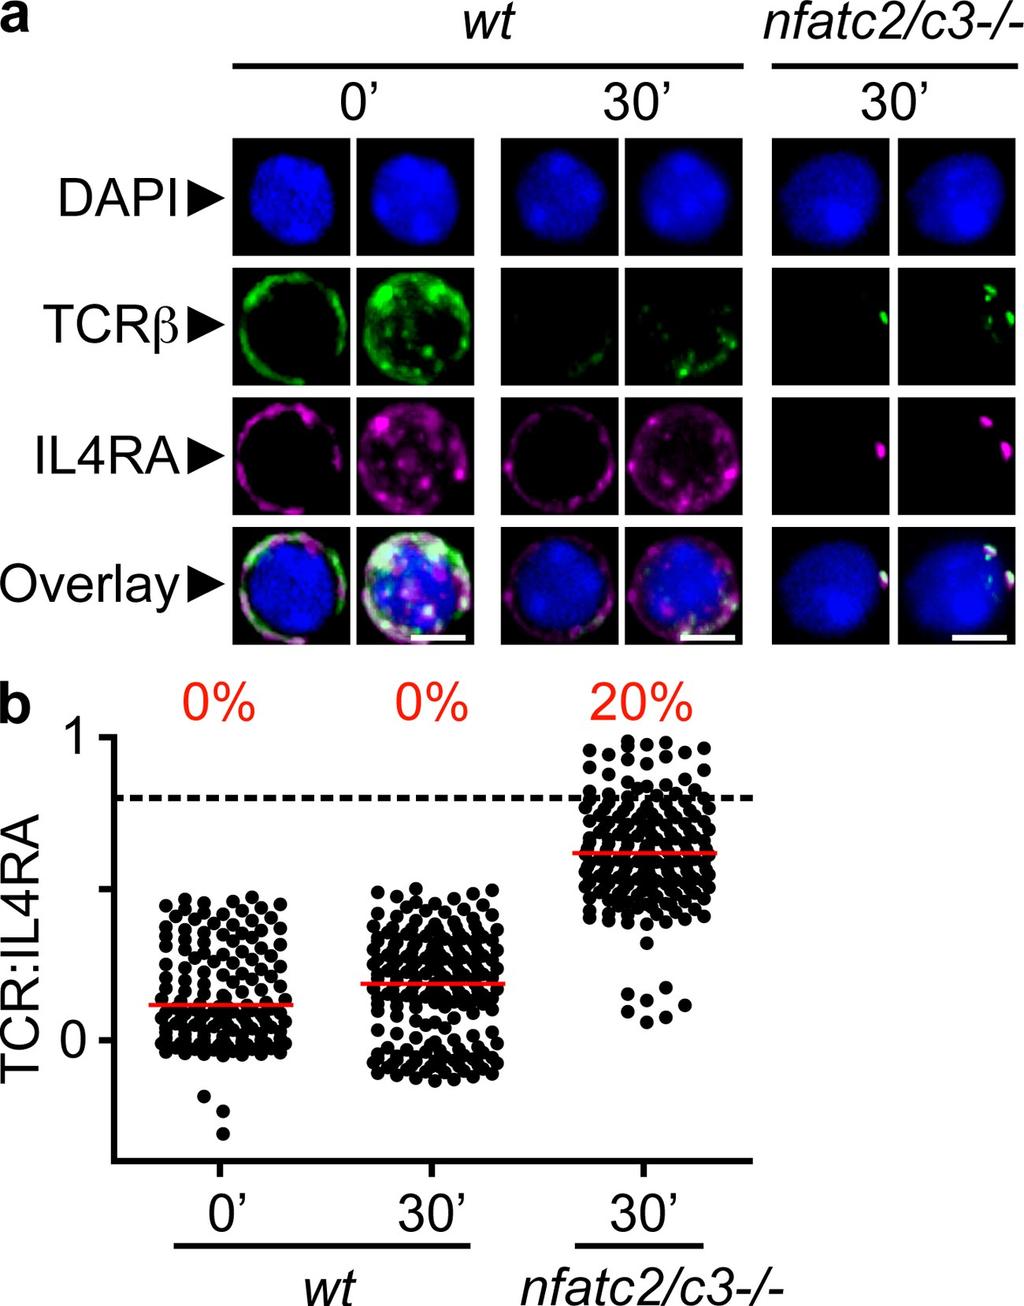 compared with the wt control. The quantification of these images confirmed the increase of between TCR and IL4R distributions only in nfatc2/c3 / Thps after activation.